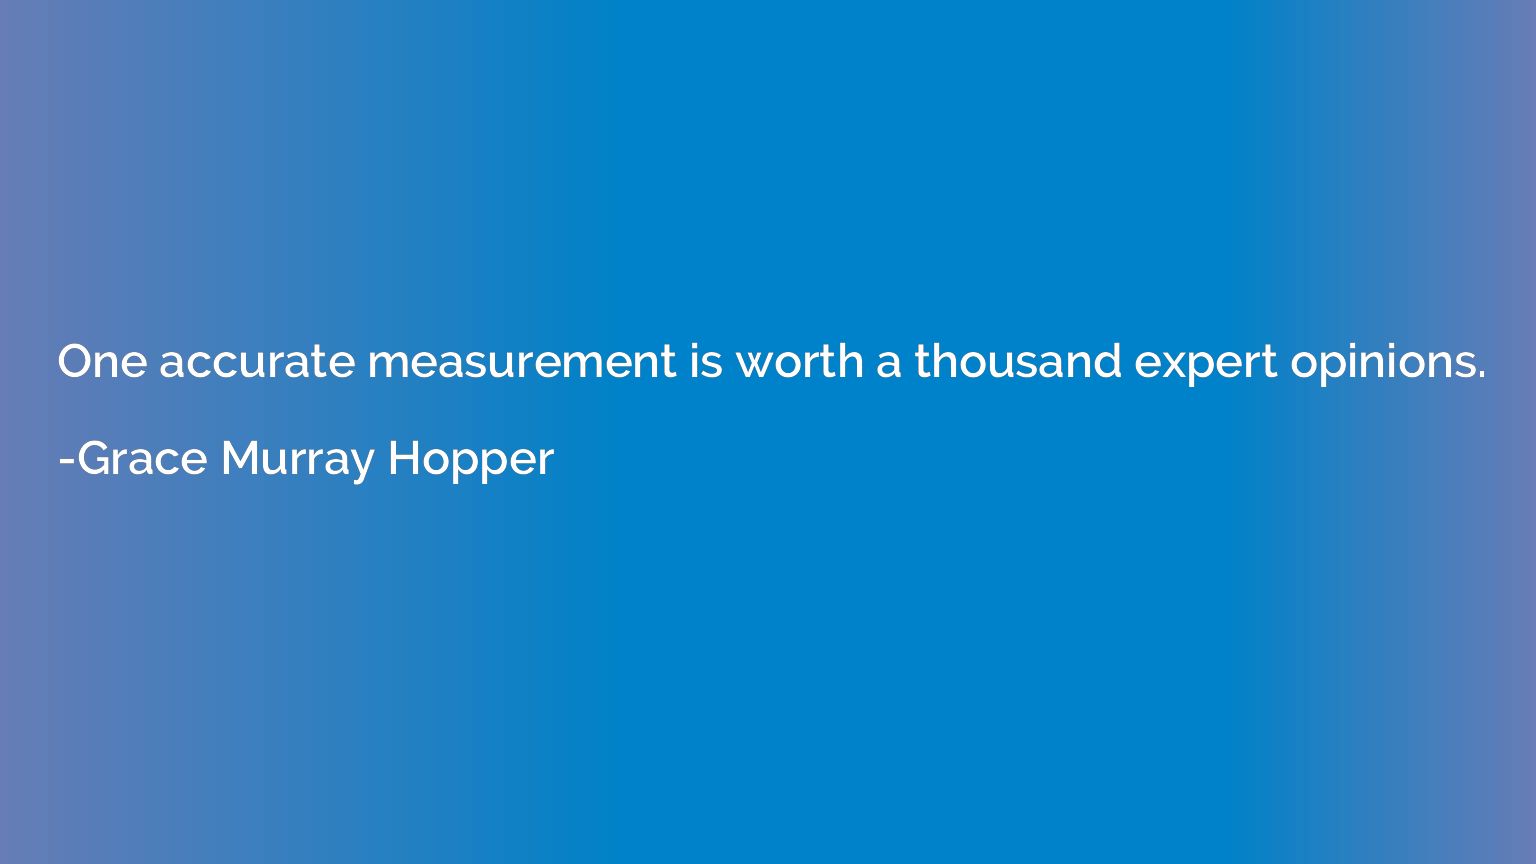 One accurate measurement is worth a thousand expert opinions